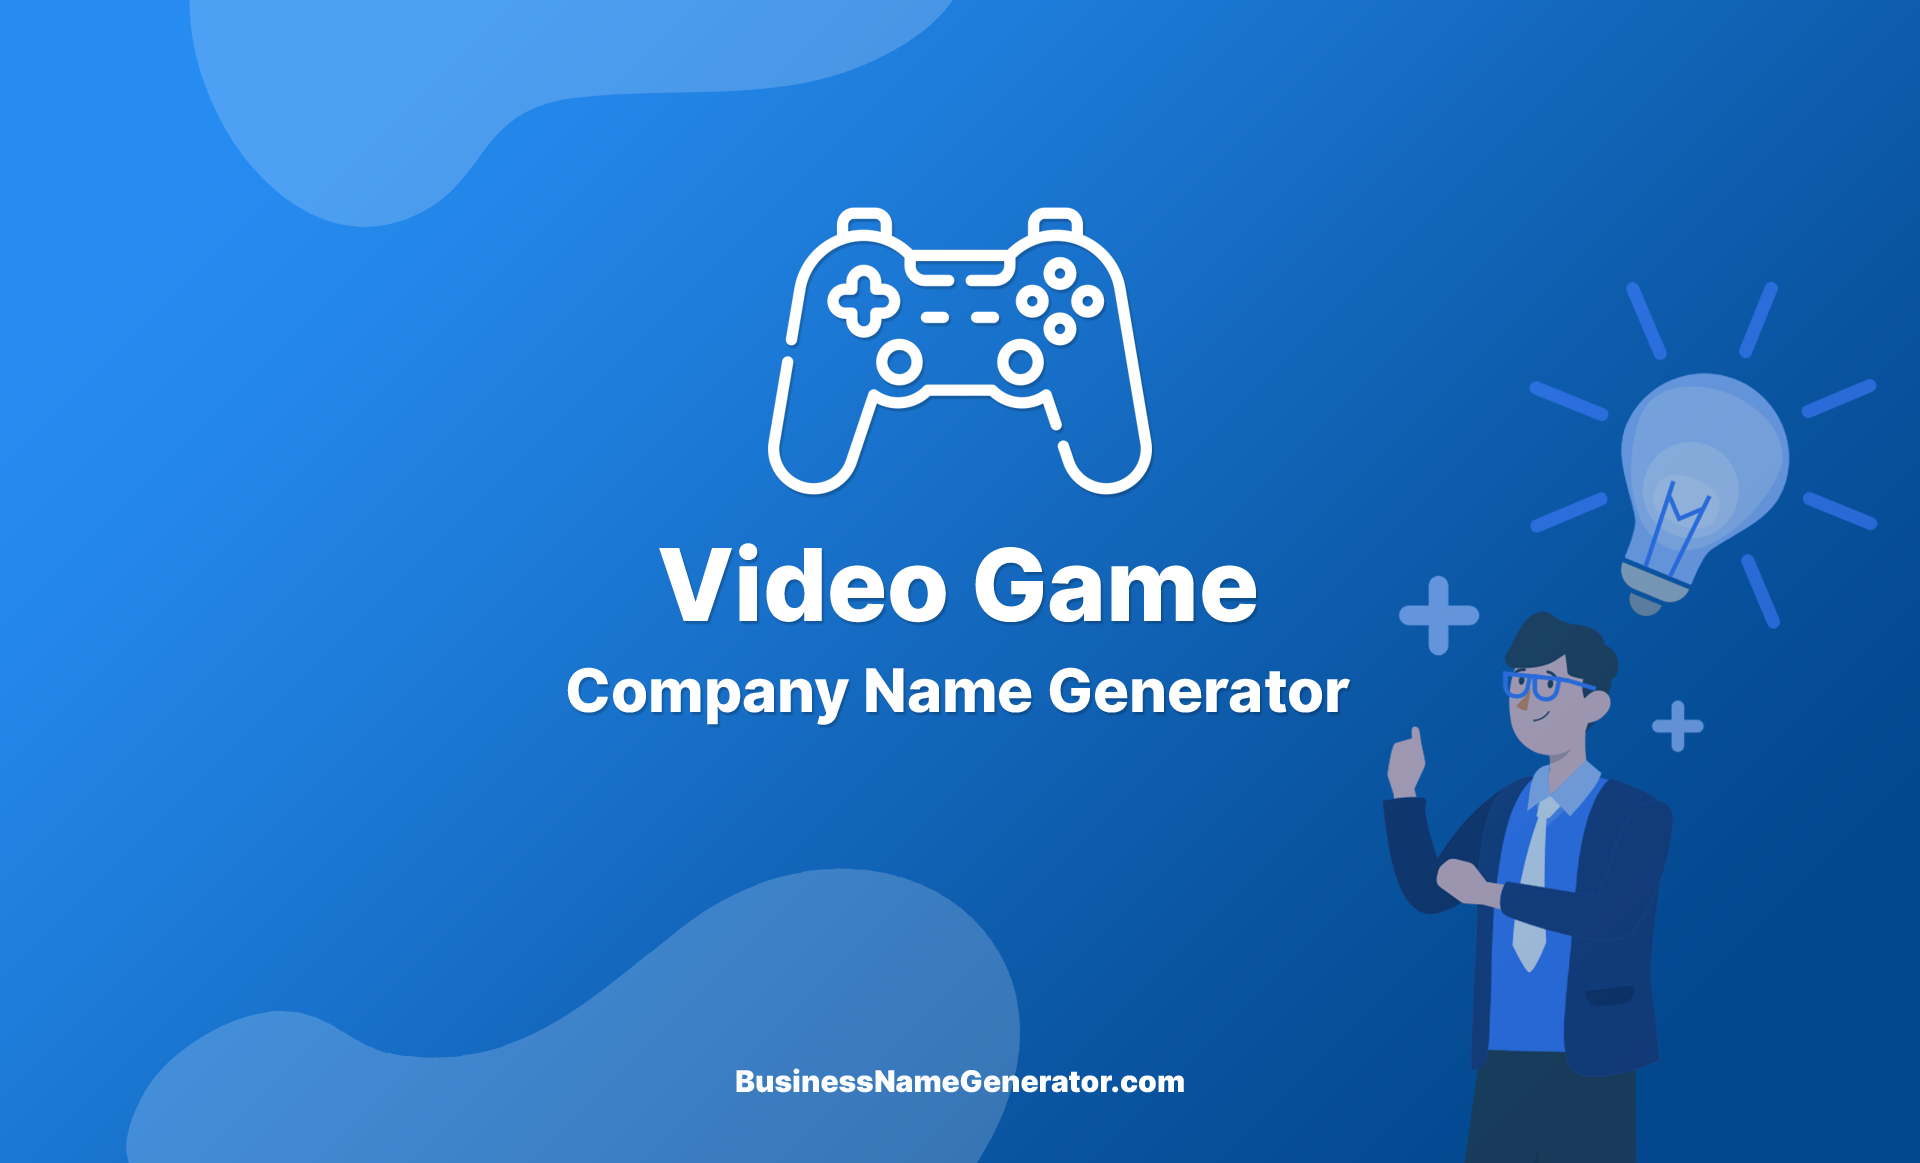 send government historic Video Game Company Name Generator + (Instant Availability Check)